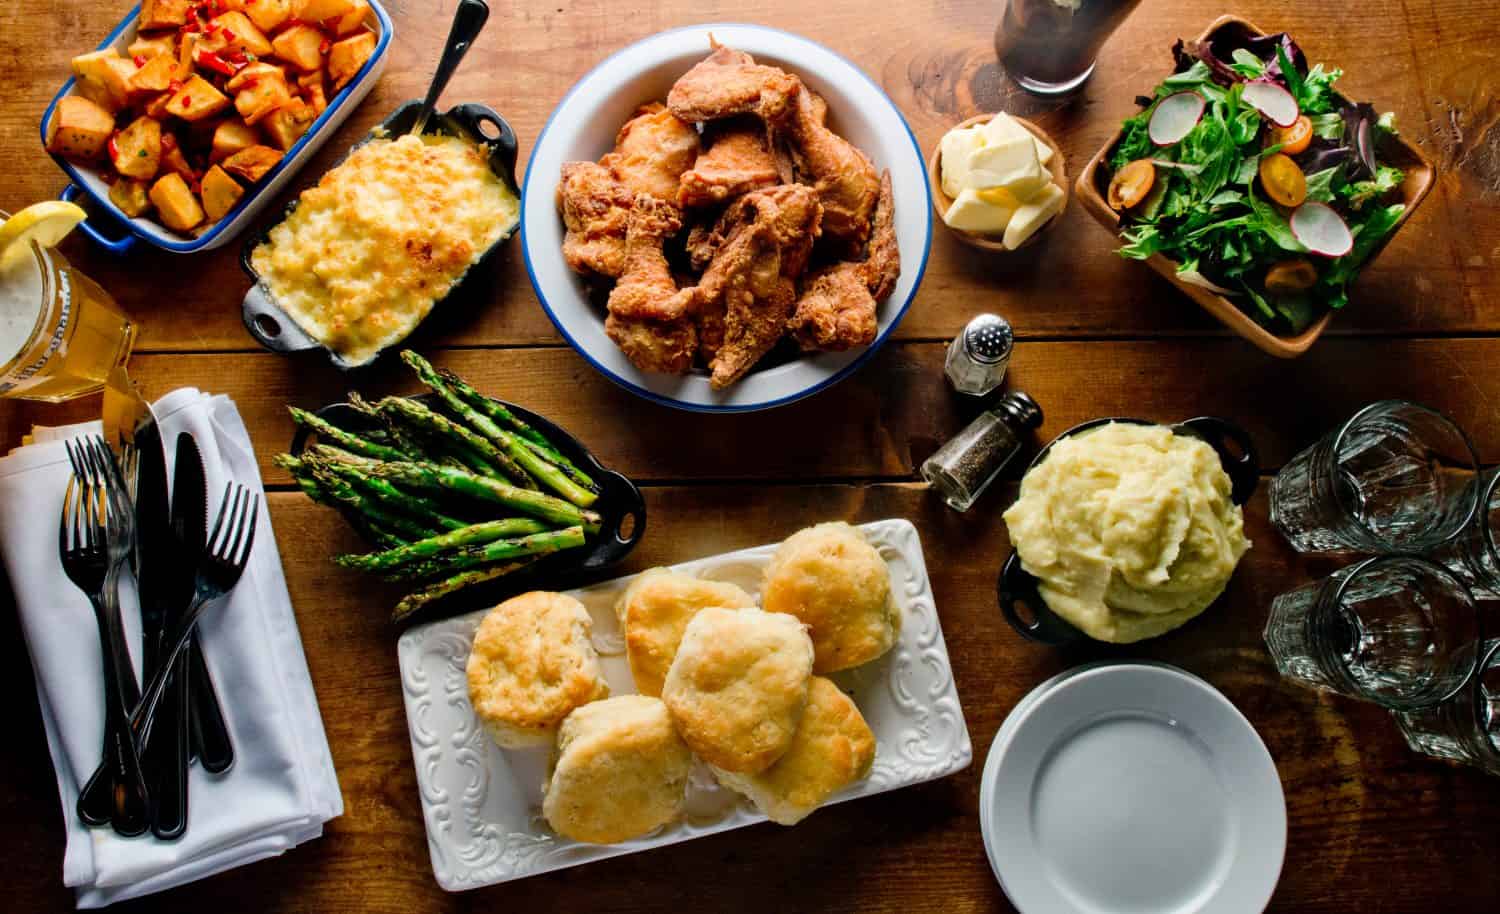 Fried Chicken. Chicken dinner served with potatoes, vegetables and rolls. Chicken, soaked in buttermilk, dredged in flour, spices and fried in a cast iron skillet. Classic American Southern cuisine.